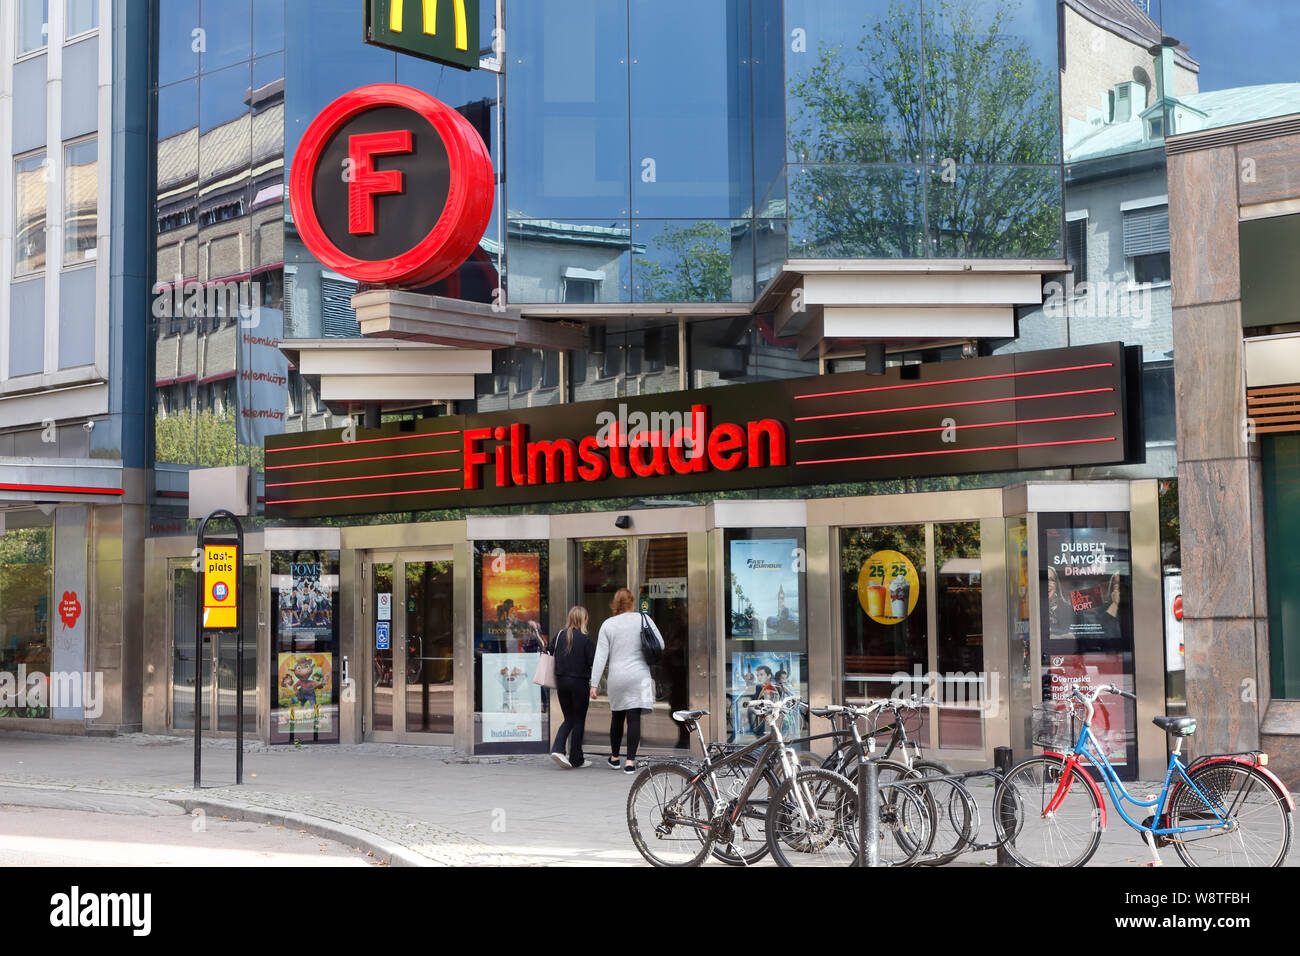 Karlstad, Sweden - August 7, 2019: Exterior view of the movie theater Filmstaden located at the Drottninggatan street. Stock Photo